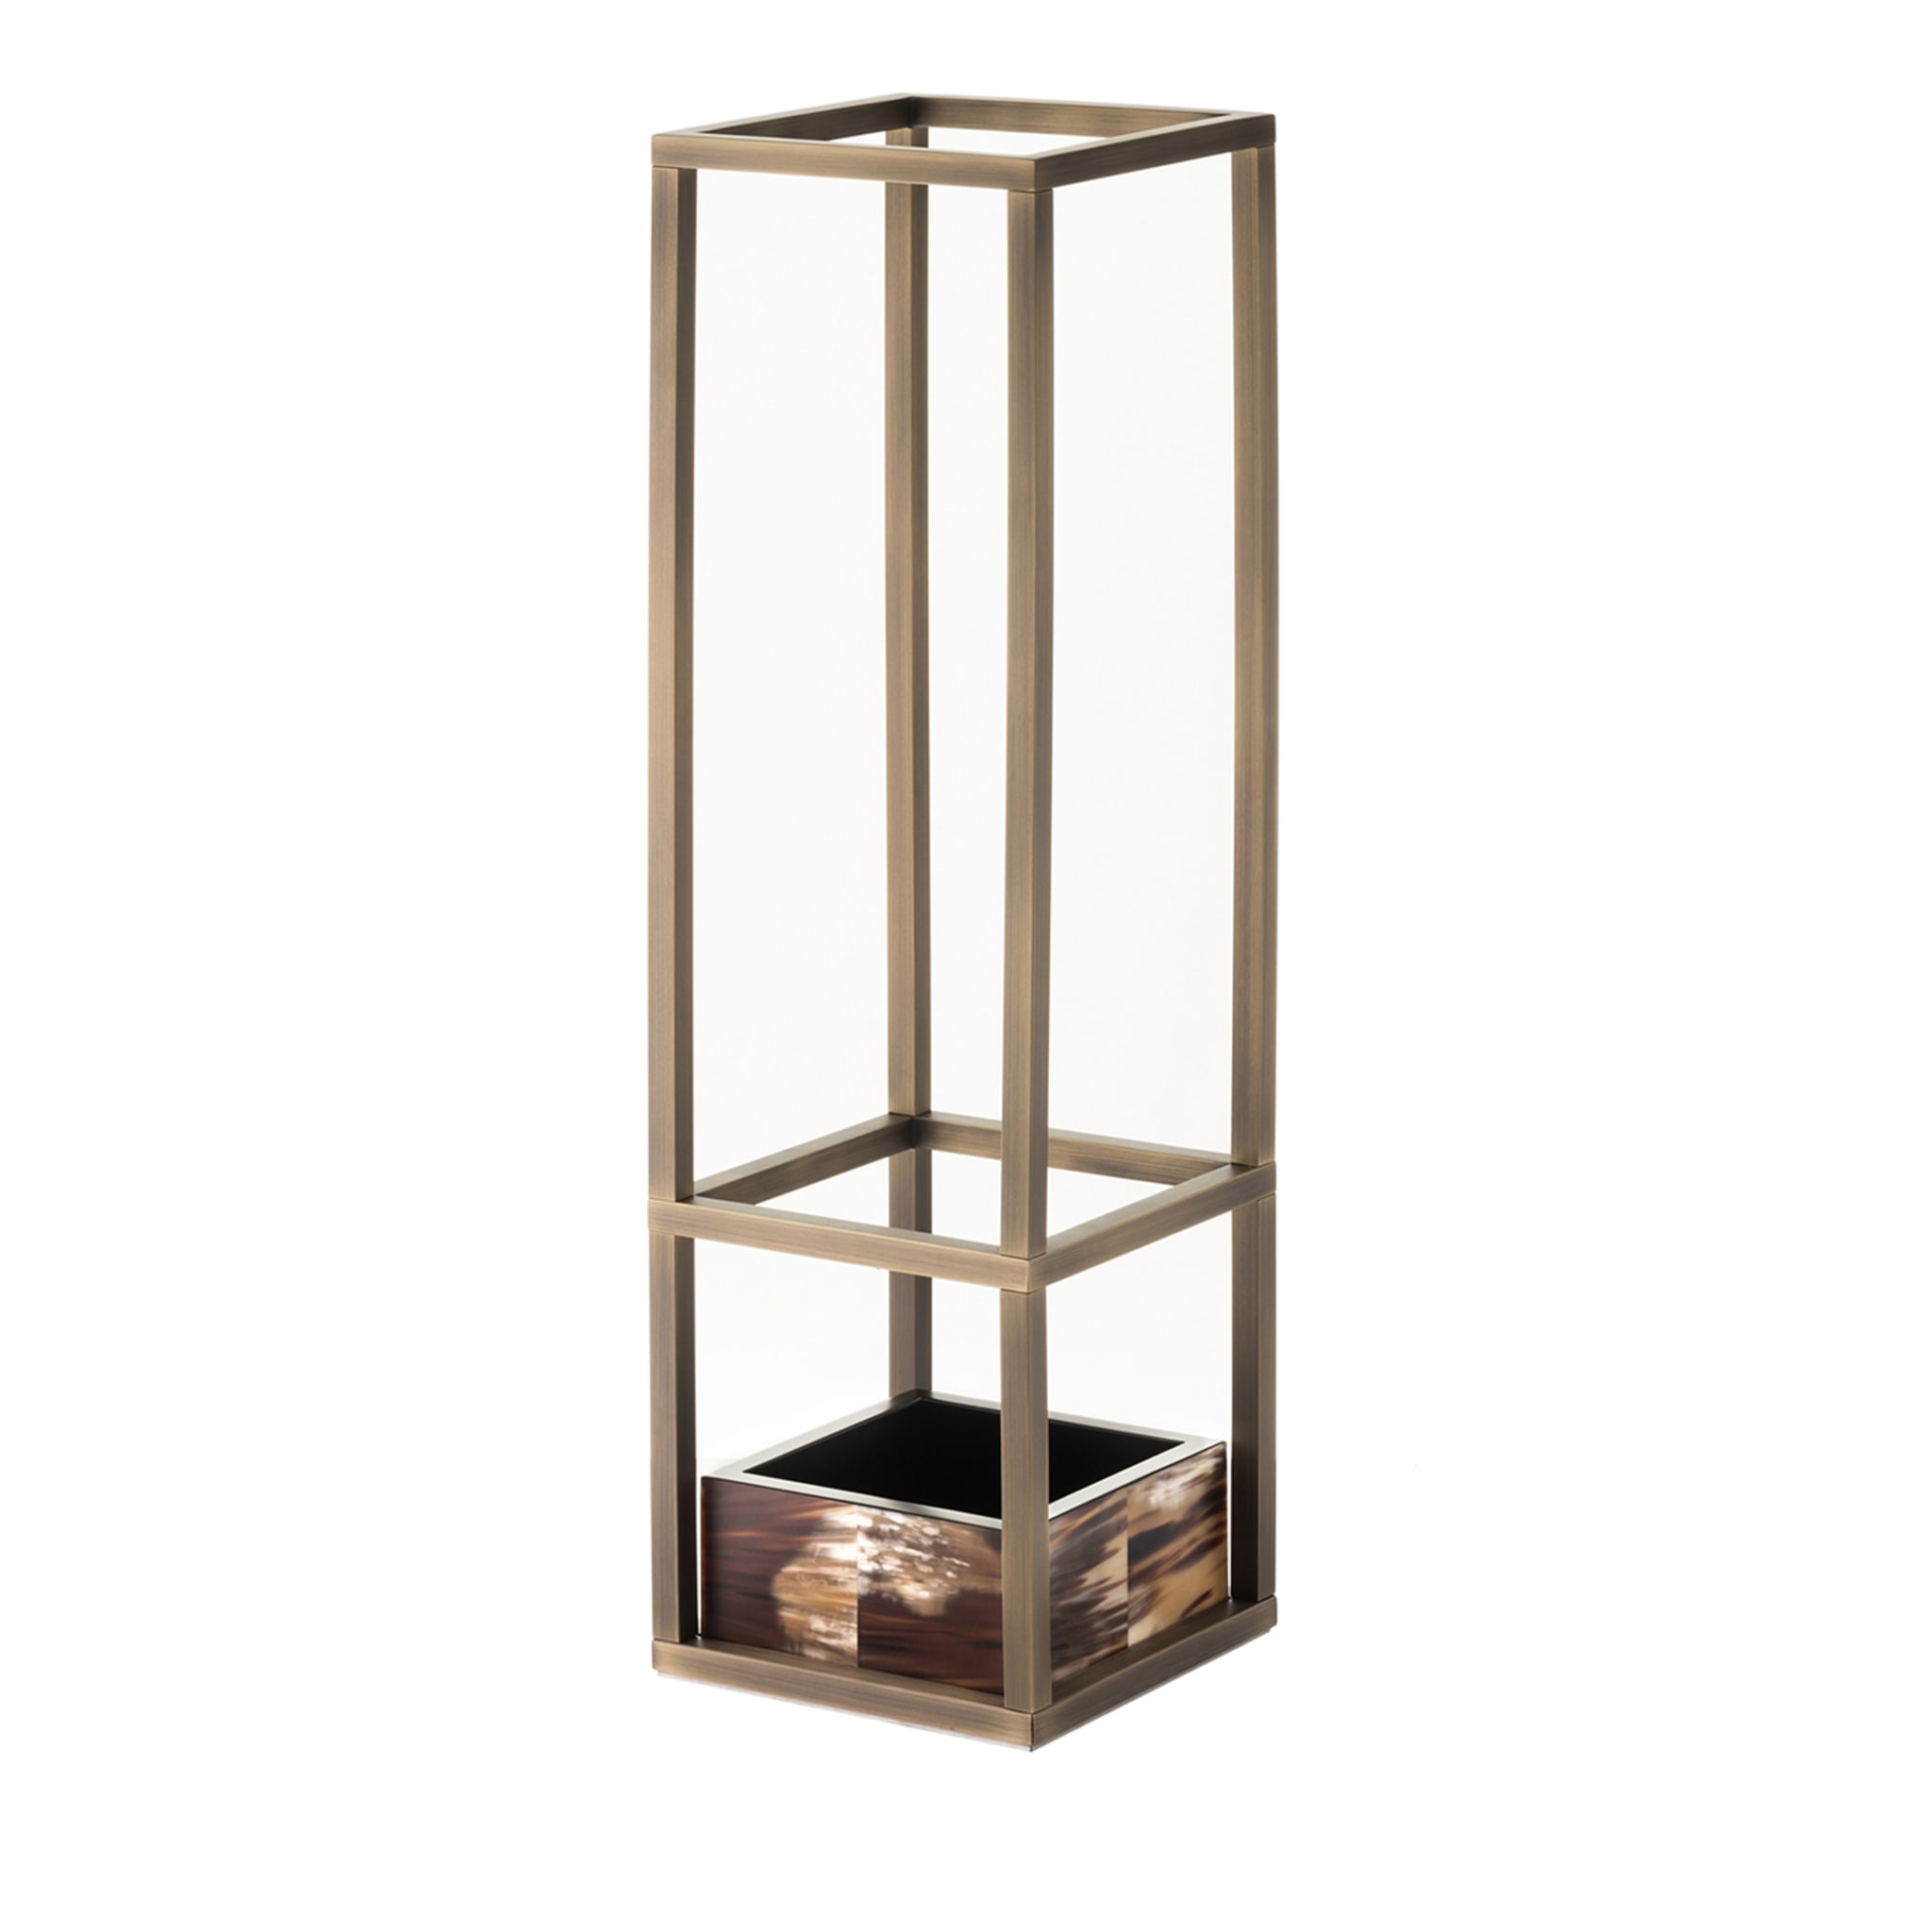 Pluvio Burnished Umbrella Stand with Horn Inserts - Main view